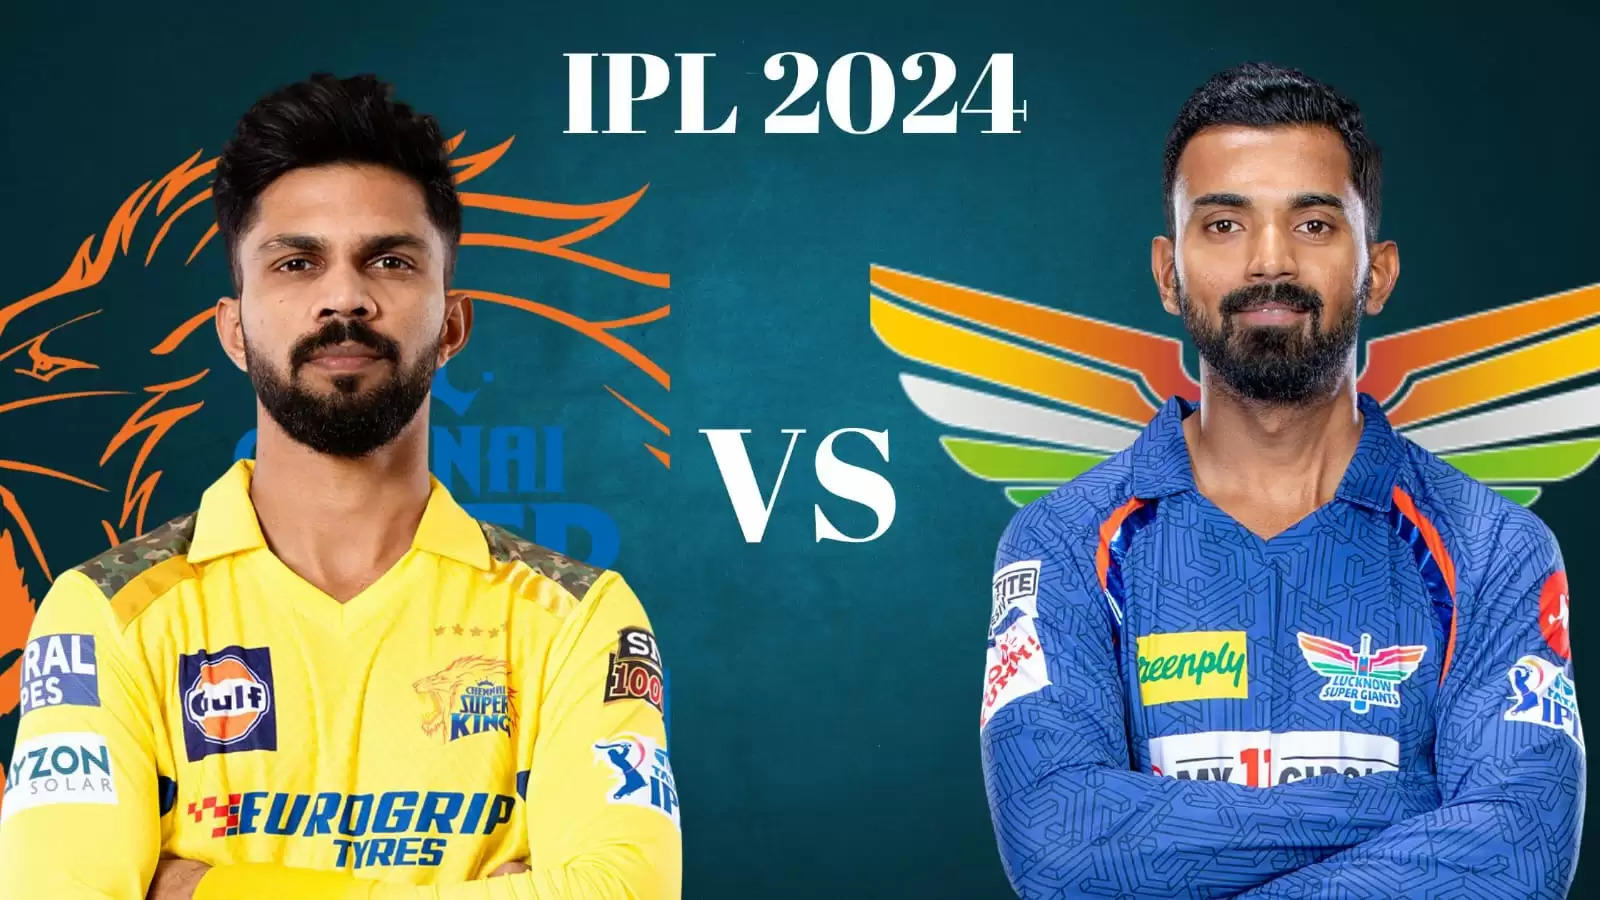 CHE vs LKN Dream11 Prediction Today Match 39: Playing XI, IPL 2024 Fantasy Cricket Tips, Chennai Super Kings vs Lucknow Super Giants Dream11 Team, Weather and Pitch Report, Injury and Team News